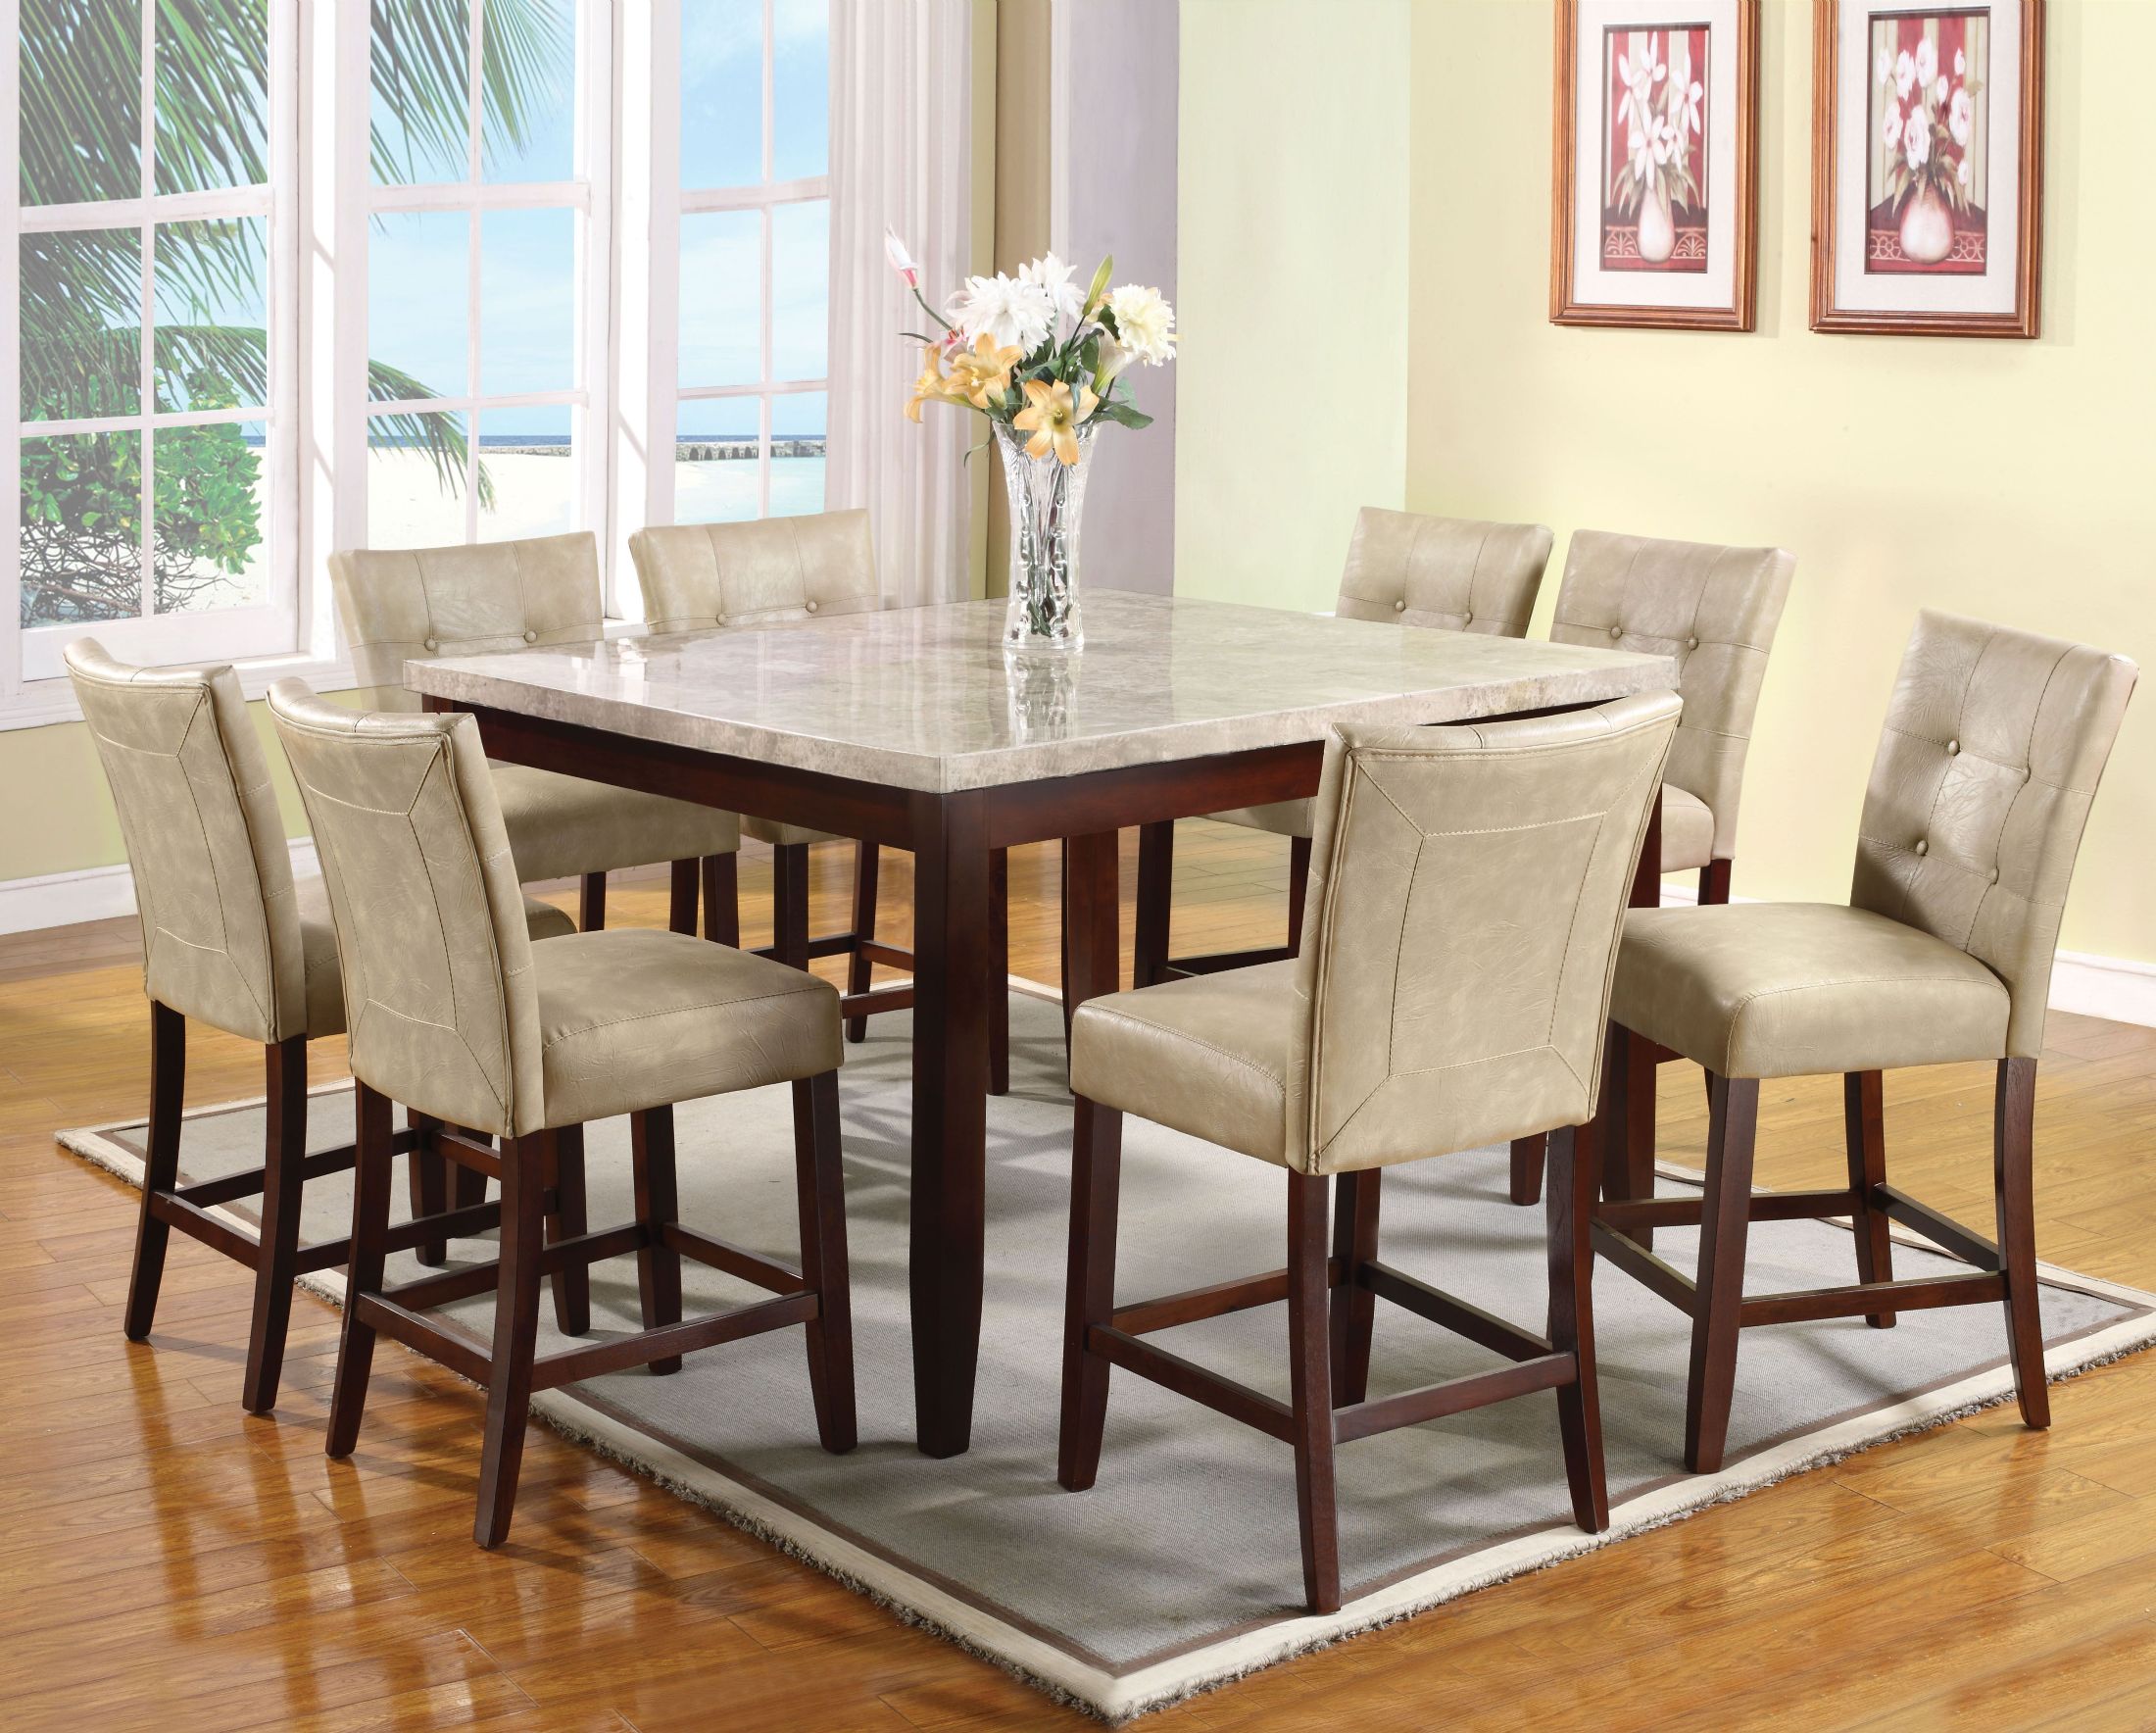 Marble Dining Room Sets For Sale